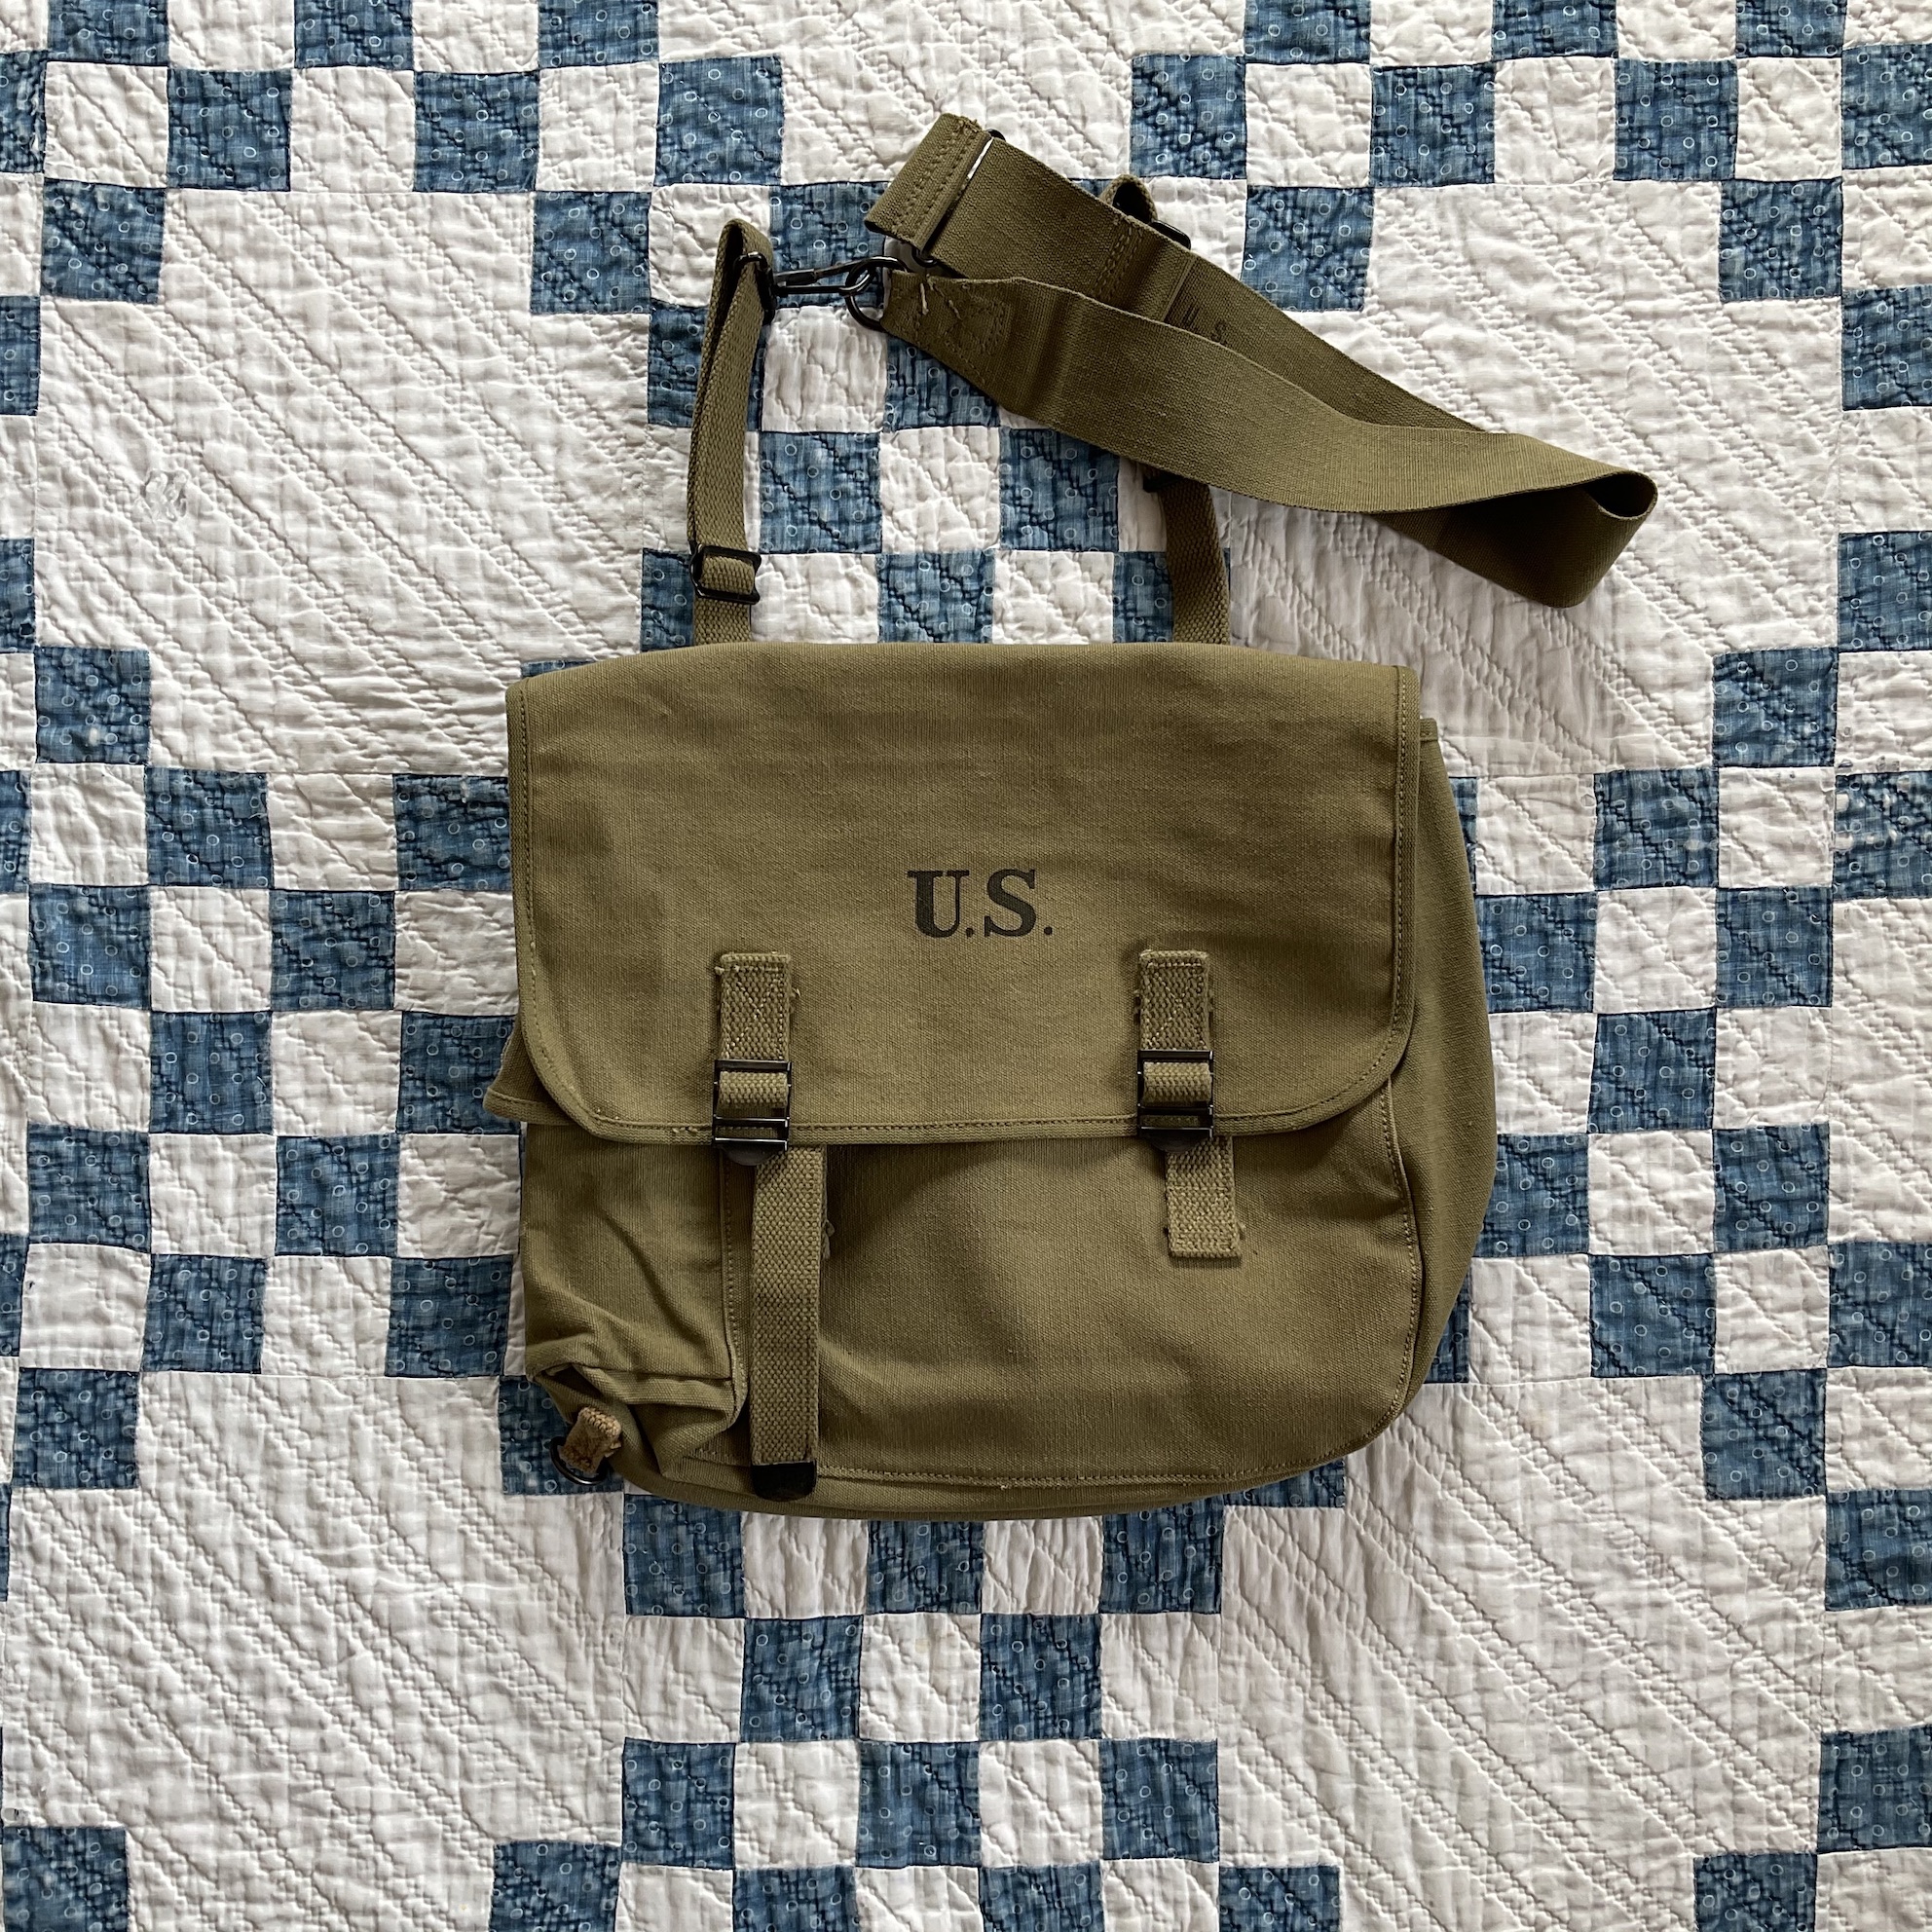 N.O.S. WW2 M-36 musette bag | Button Up Clothing